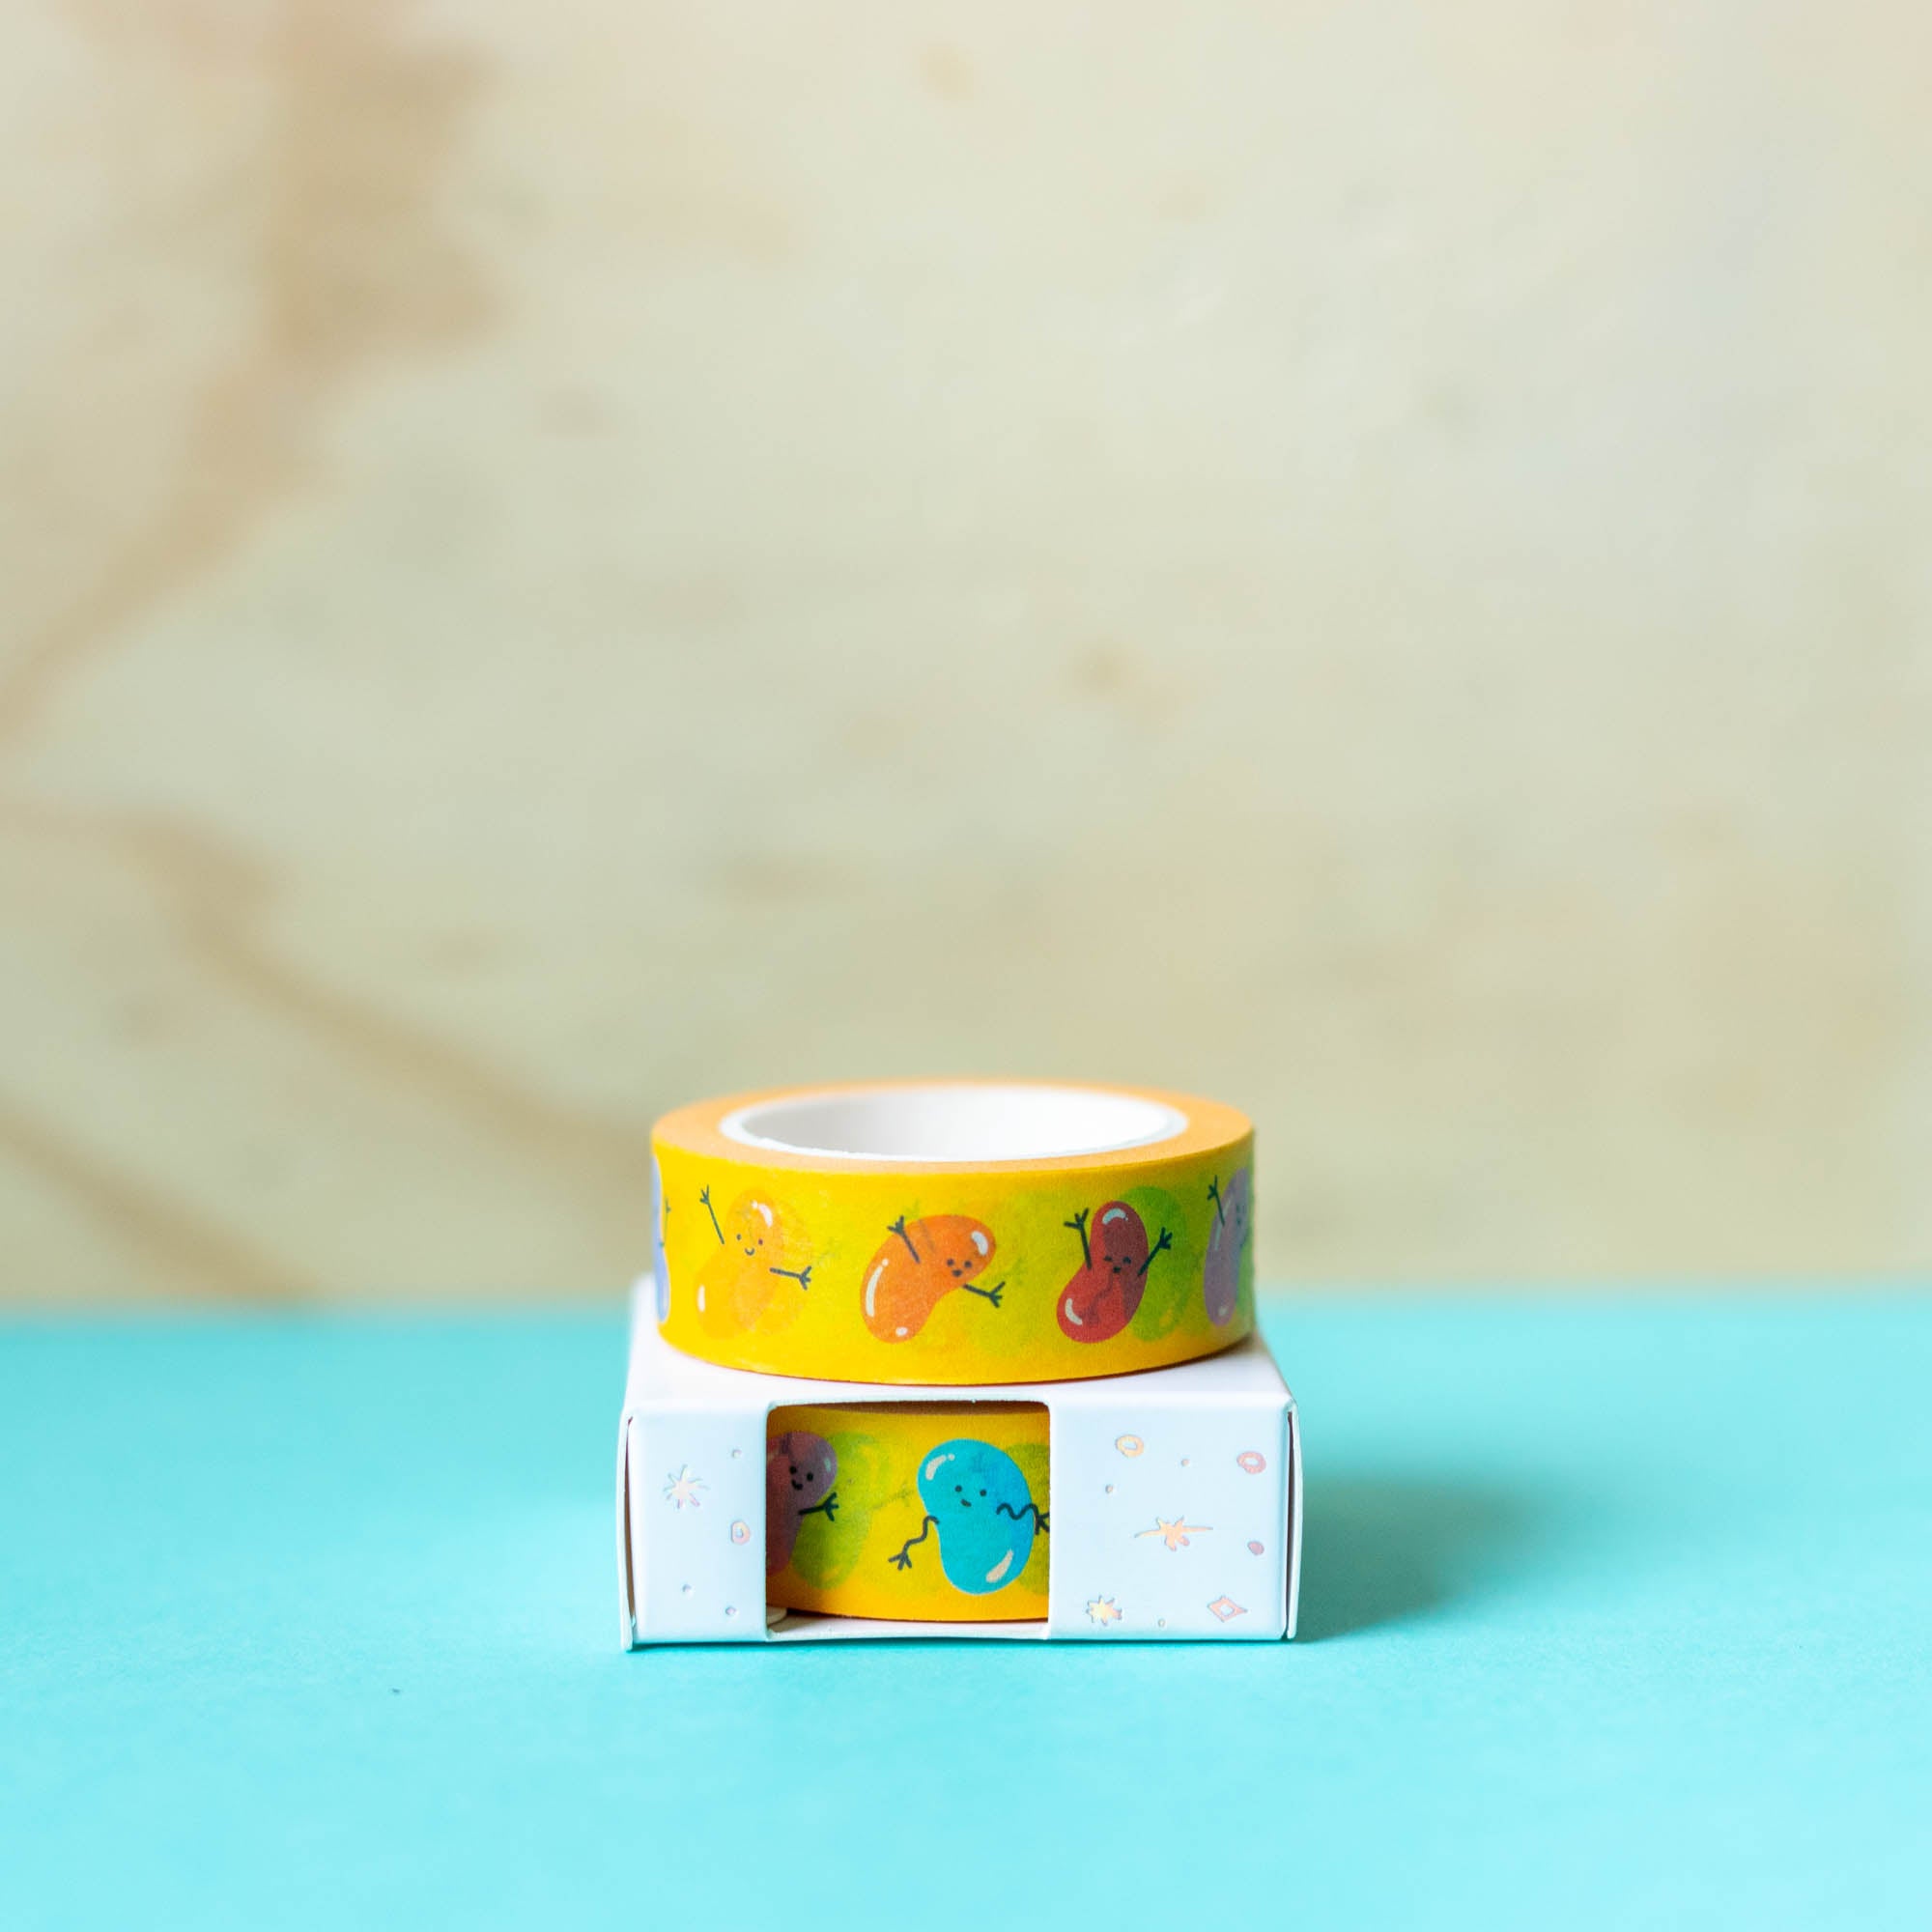 Cool Beans Washi Tape - Finest Imaginary